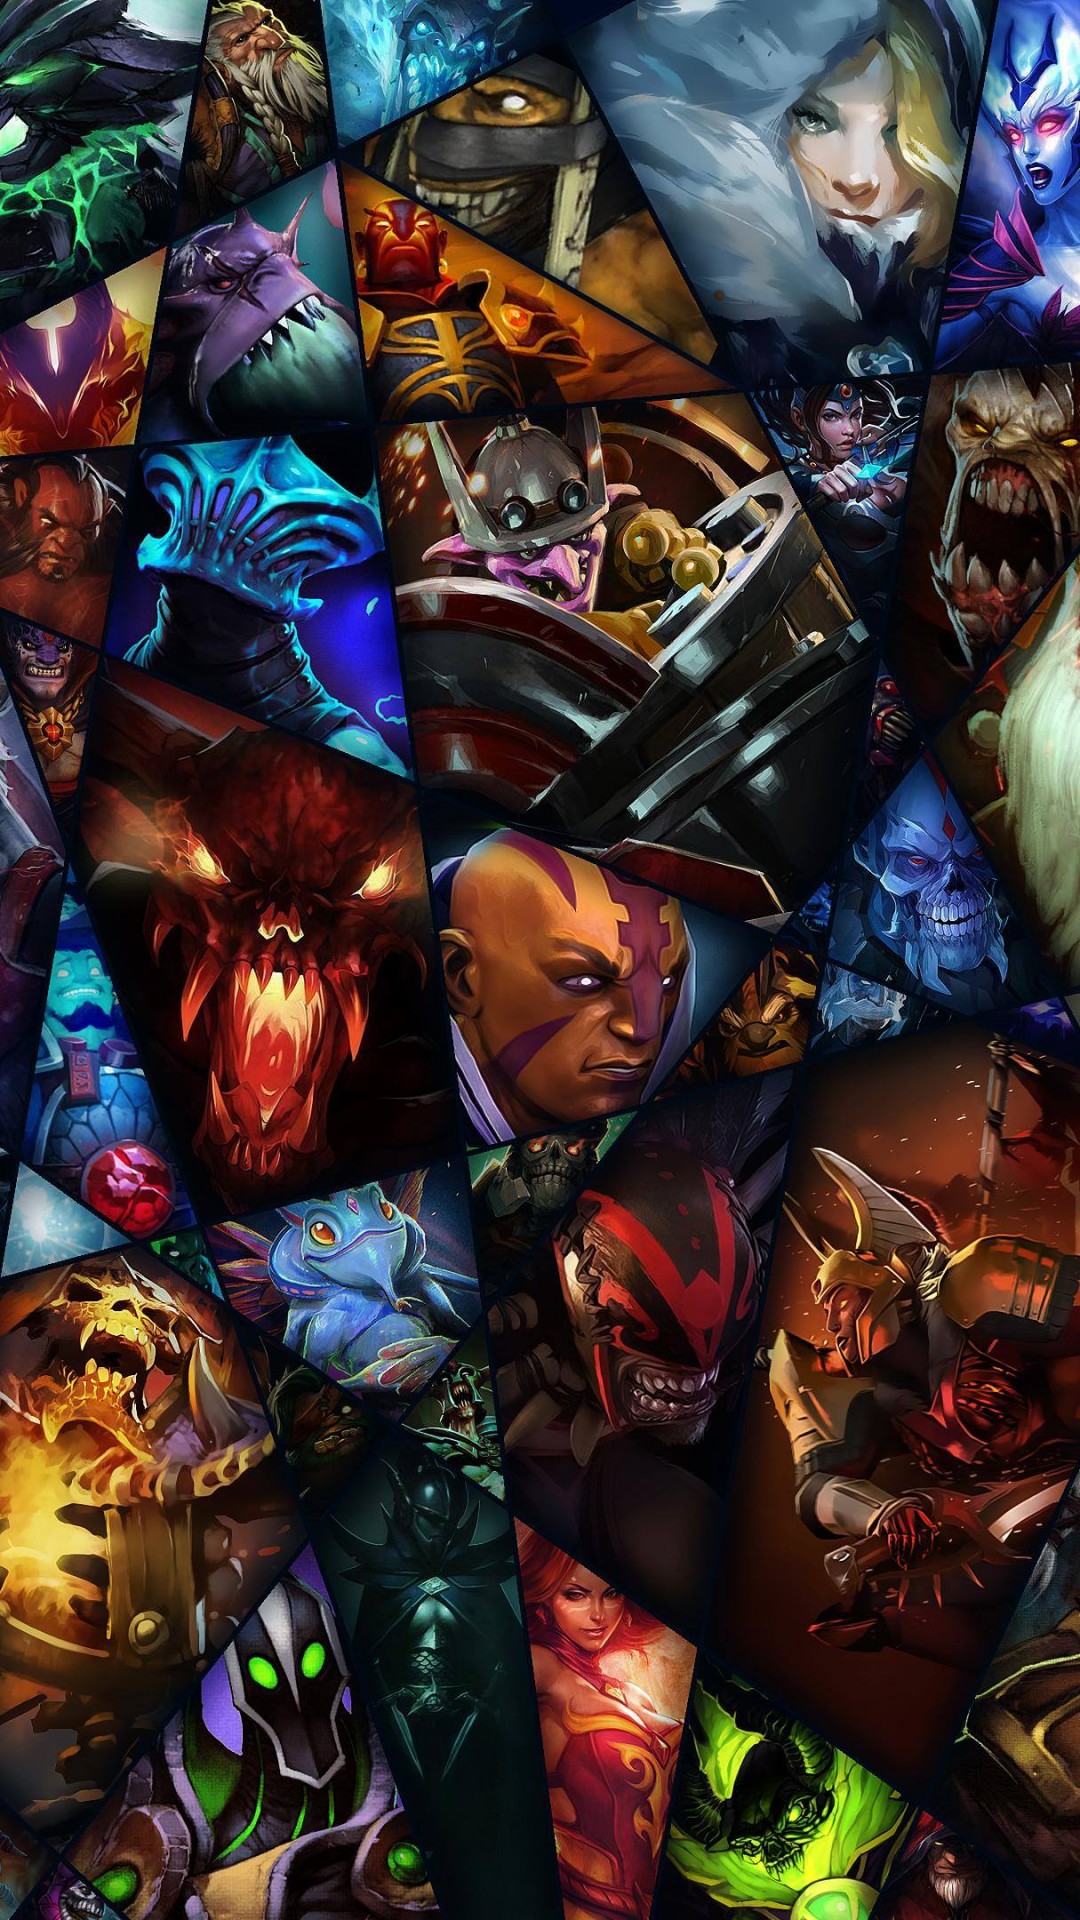 dota 2 wallpaper for iphone,art,fictional character,cg artwork,games,collage